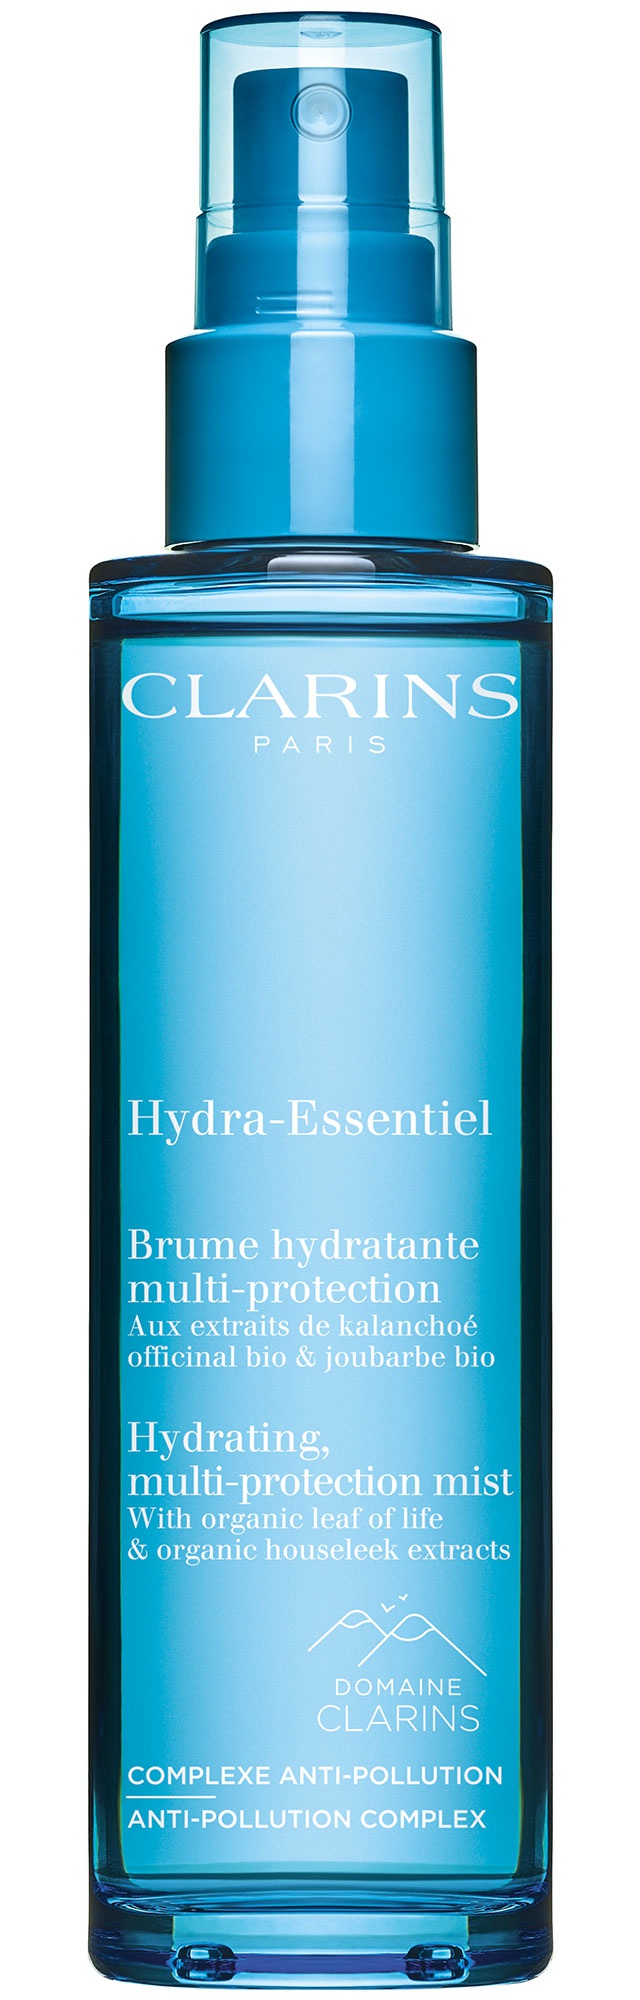 Clarins Hydrating Multi-Protection Mist